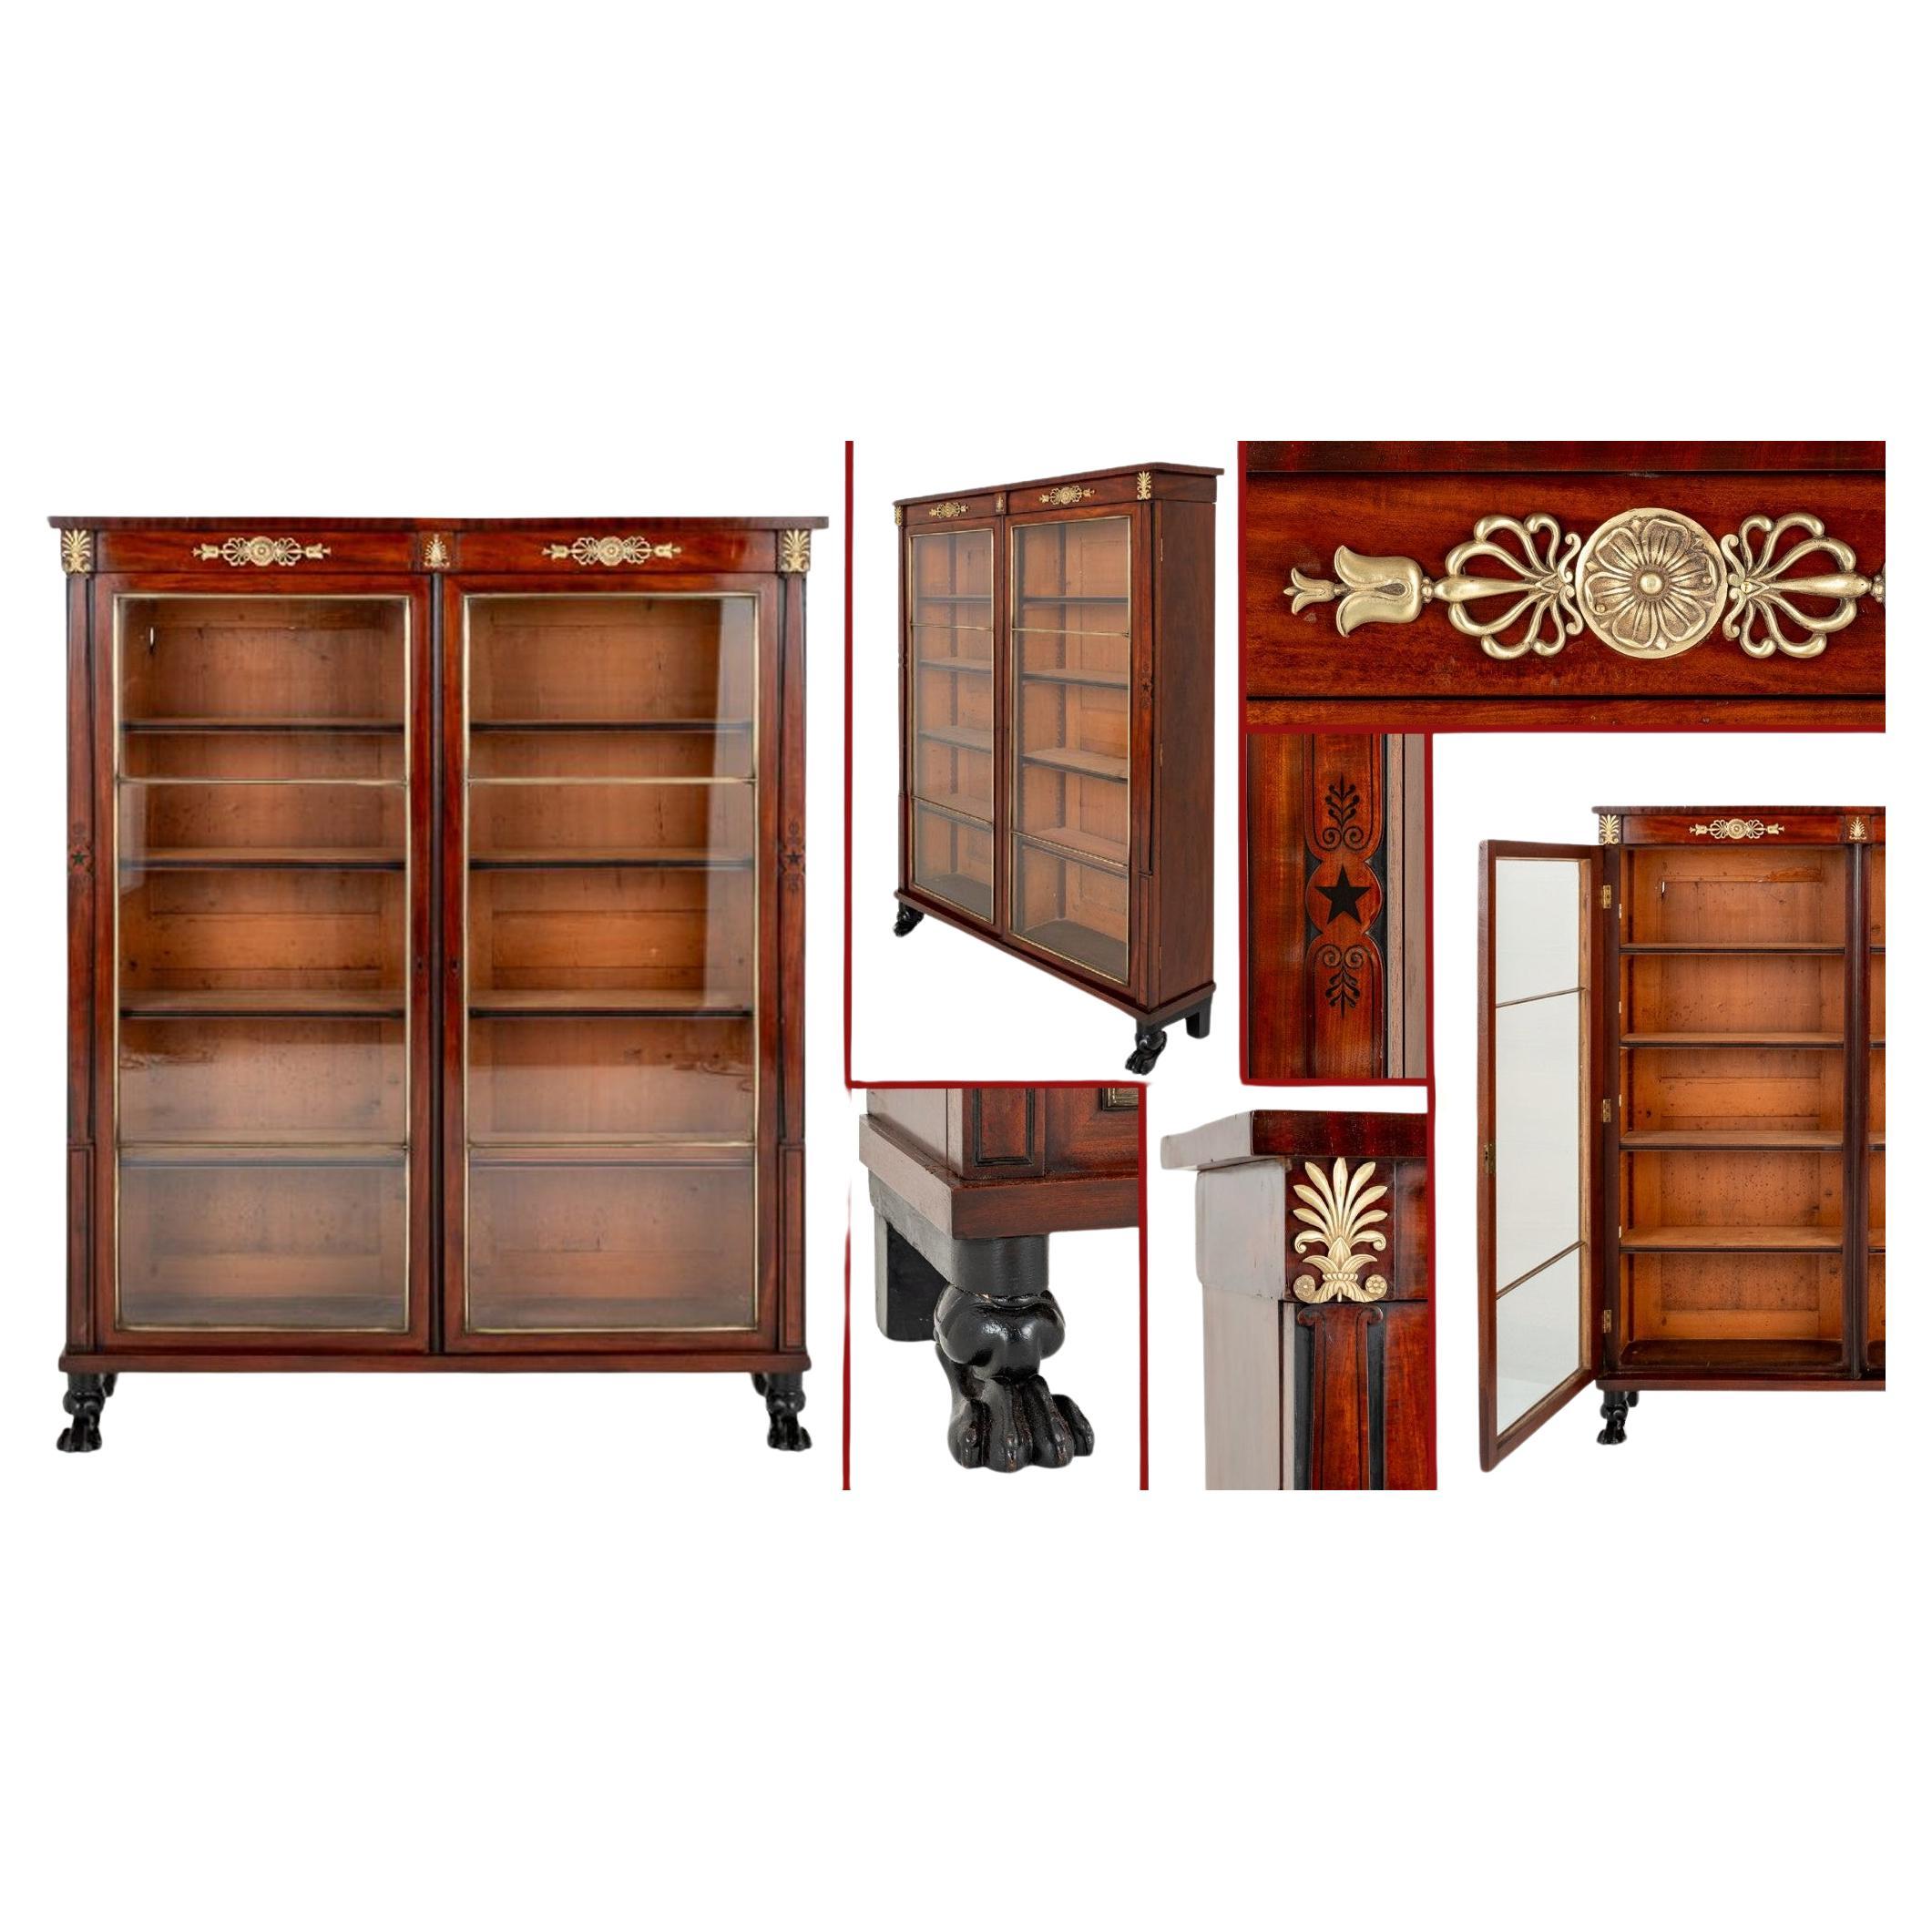 Regency Bookcase Glazed Cabinet Mahogany Period Antique For Sale